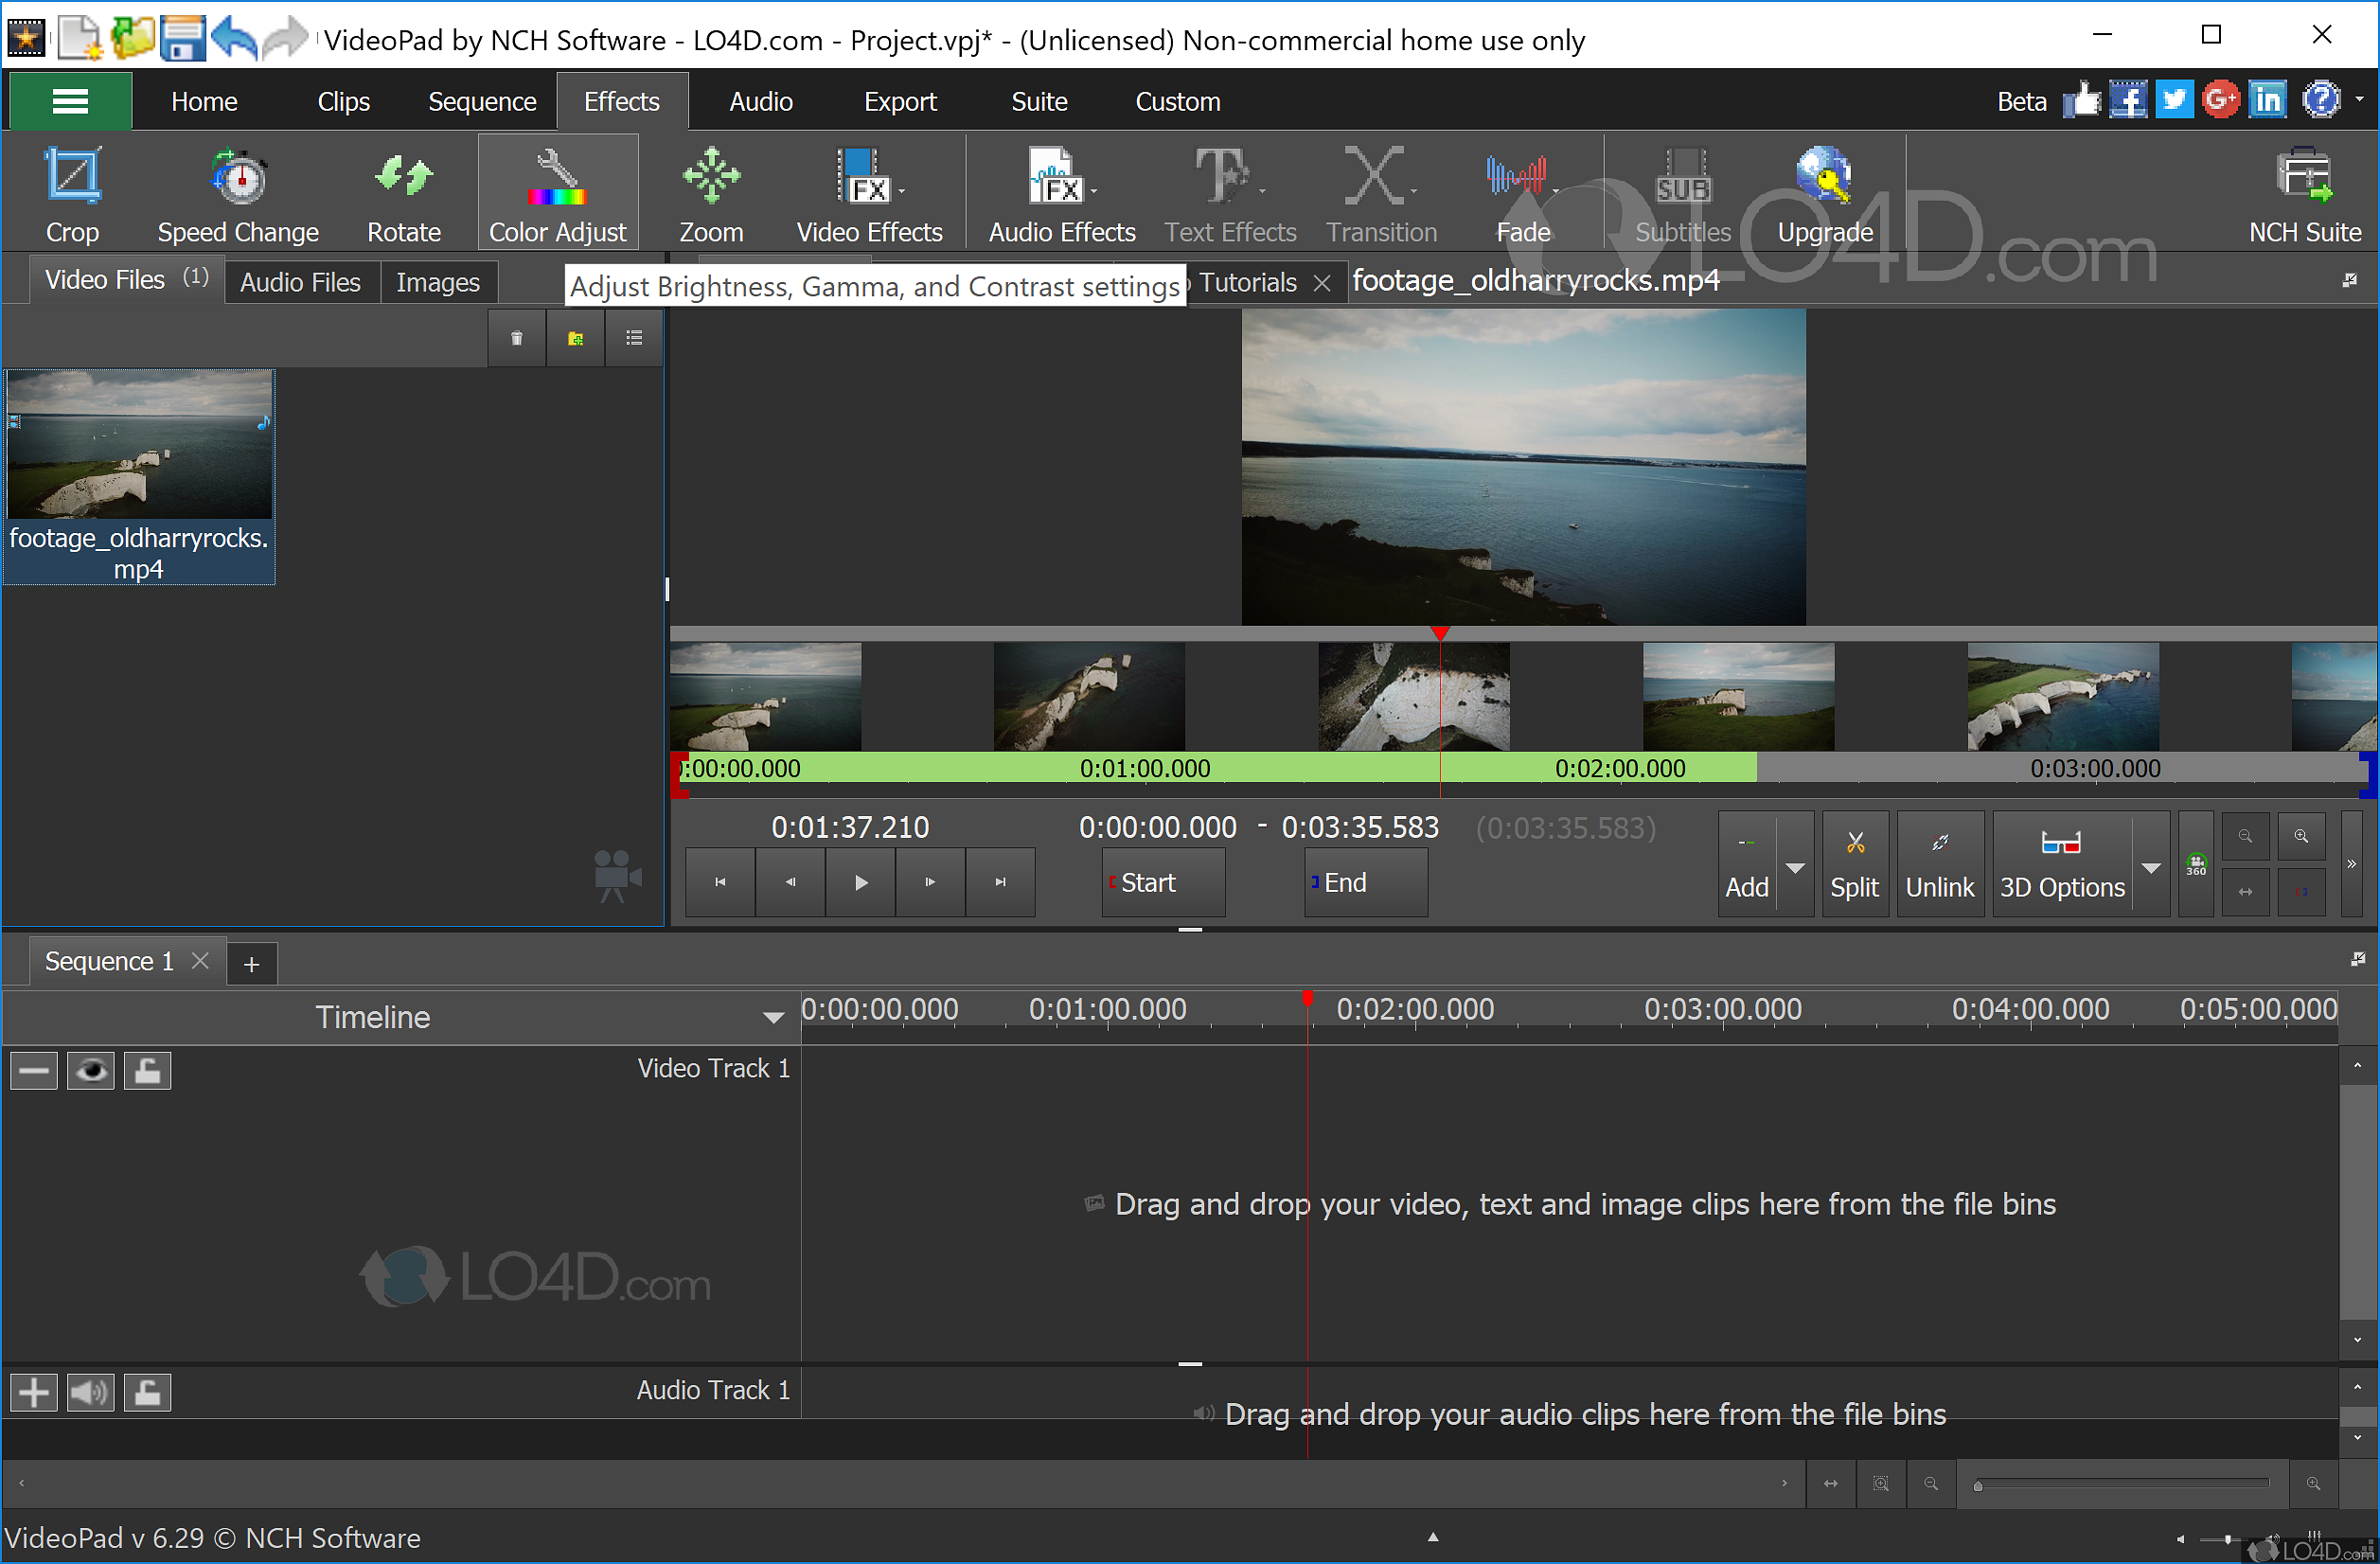 videopad video editor full free version download